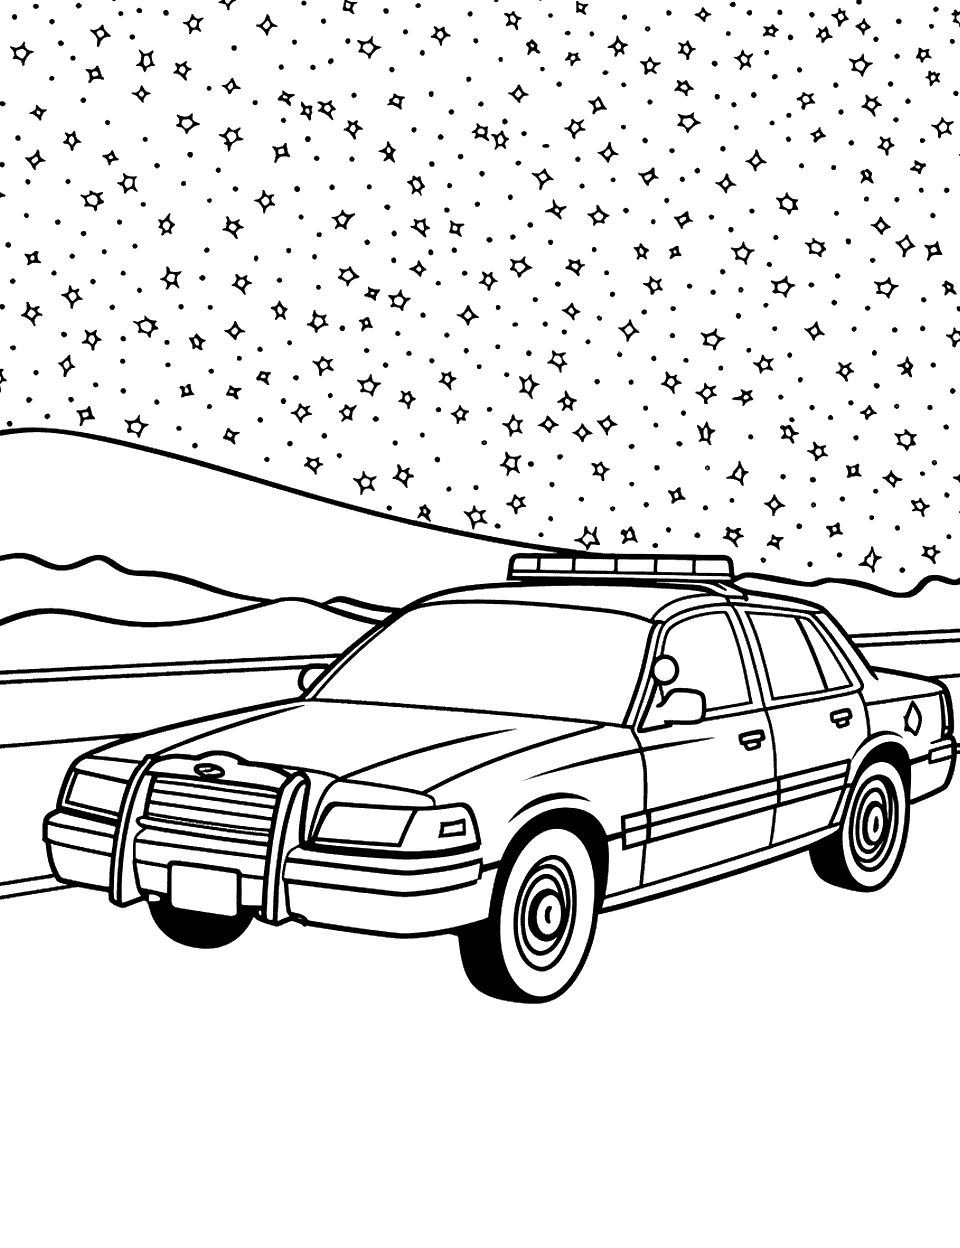 Midnight Highway Patrol Police Car Coloring Page - A police car driving on a quiet highway under a starry sky.